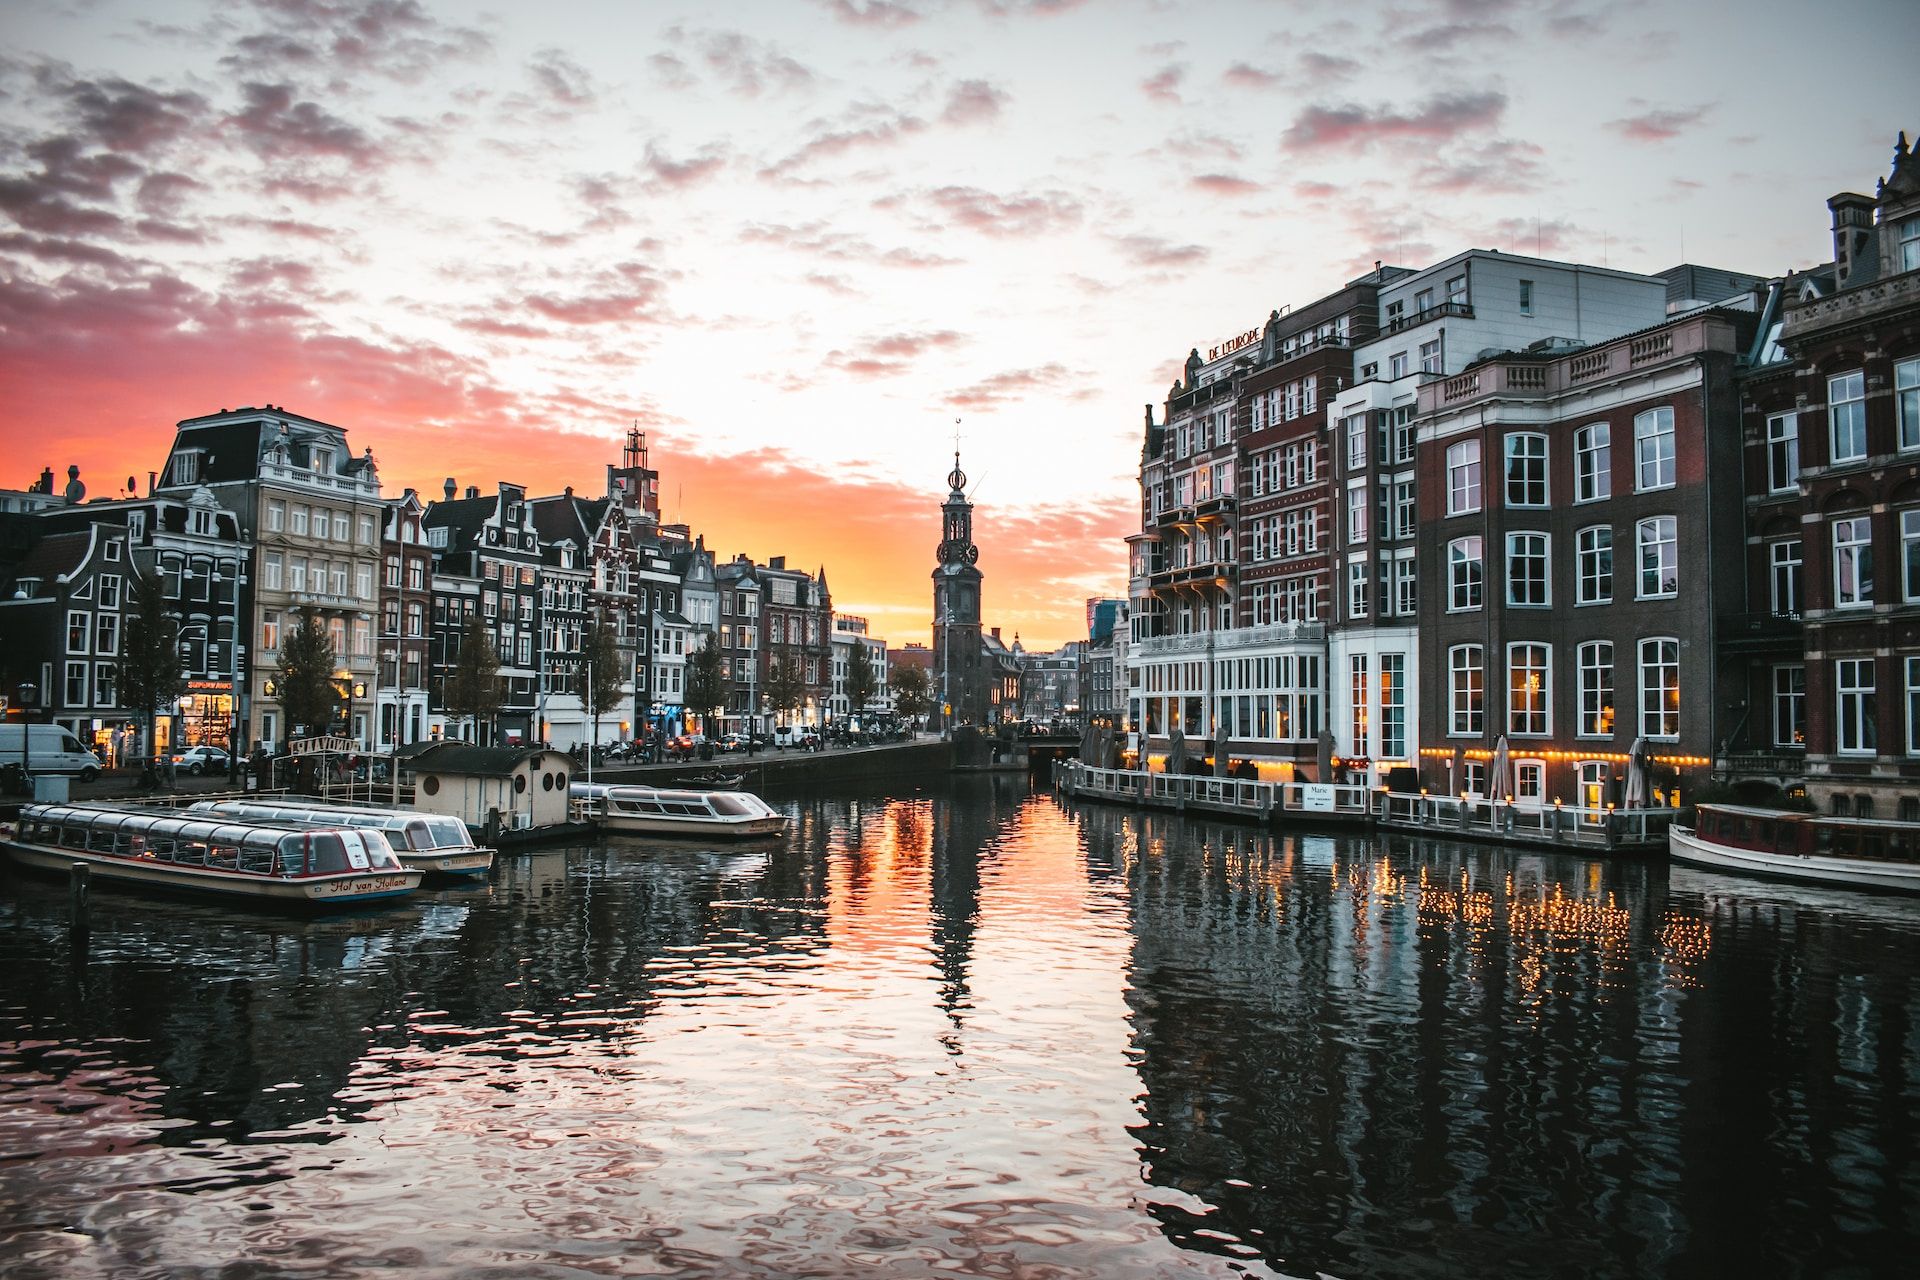 Sunset over the canal and Muntplein in Amsterdam.